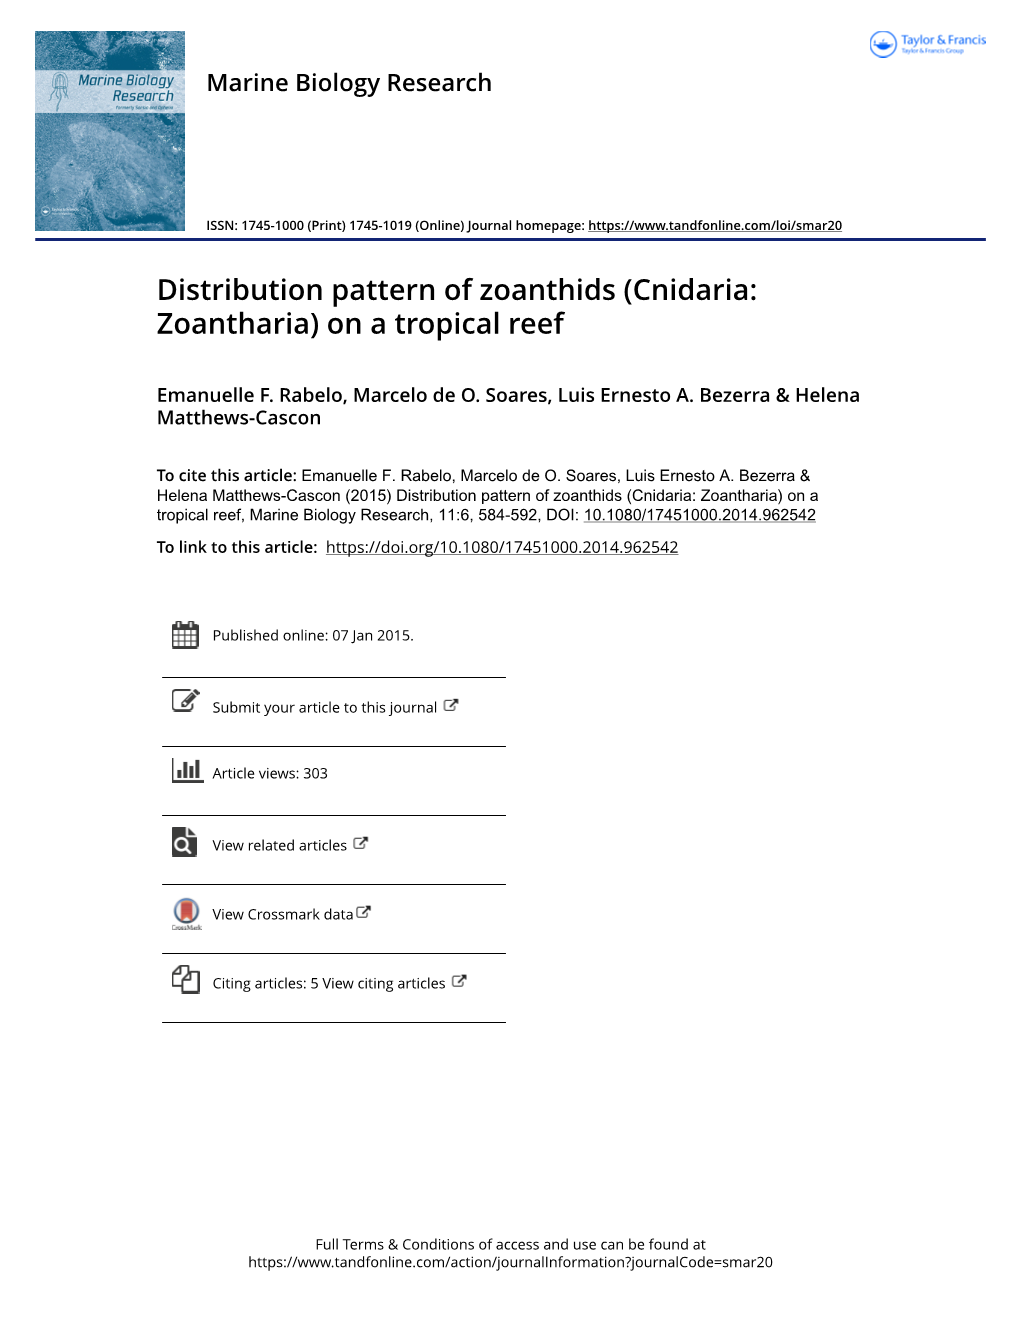 Distribution Pattern of Zoanthids (Cnidaria: Zoantharia) on a Tropical Reef